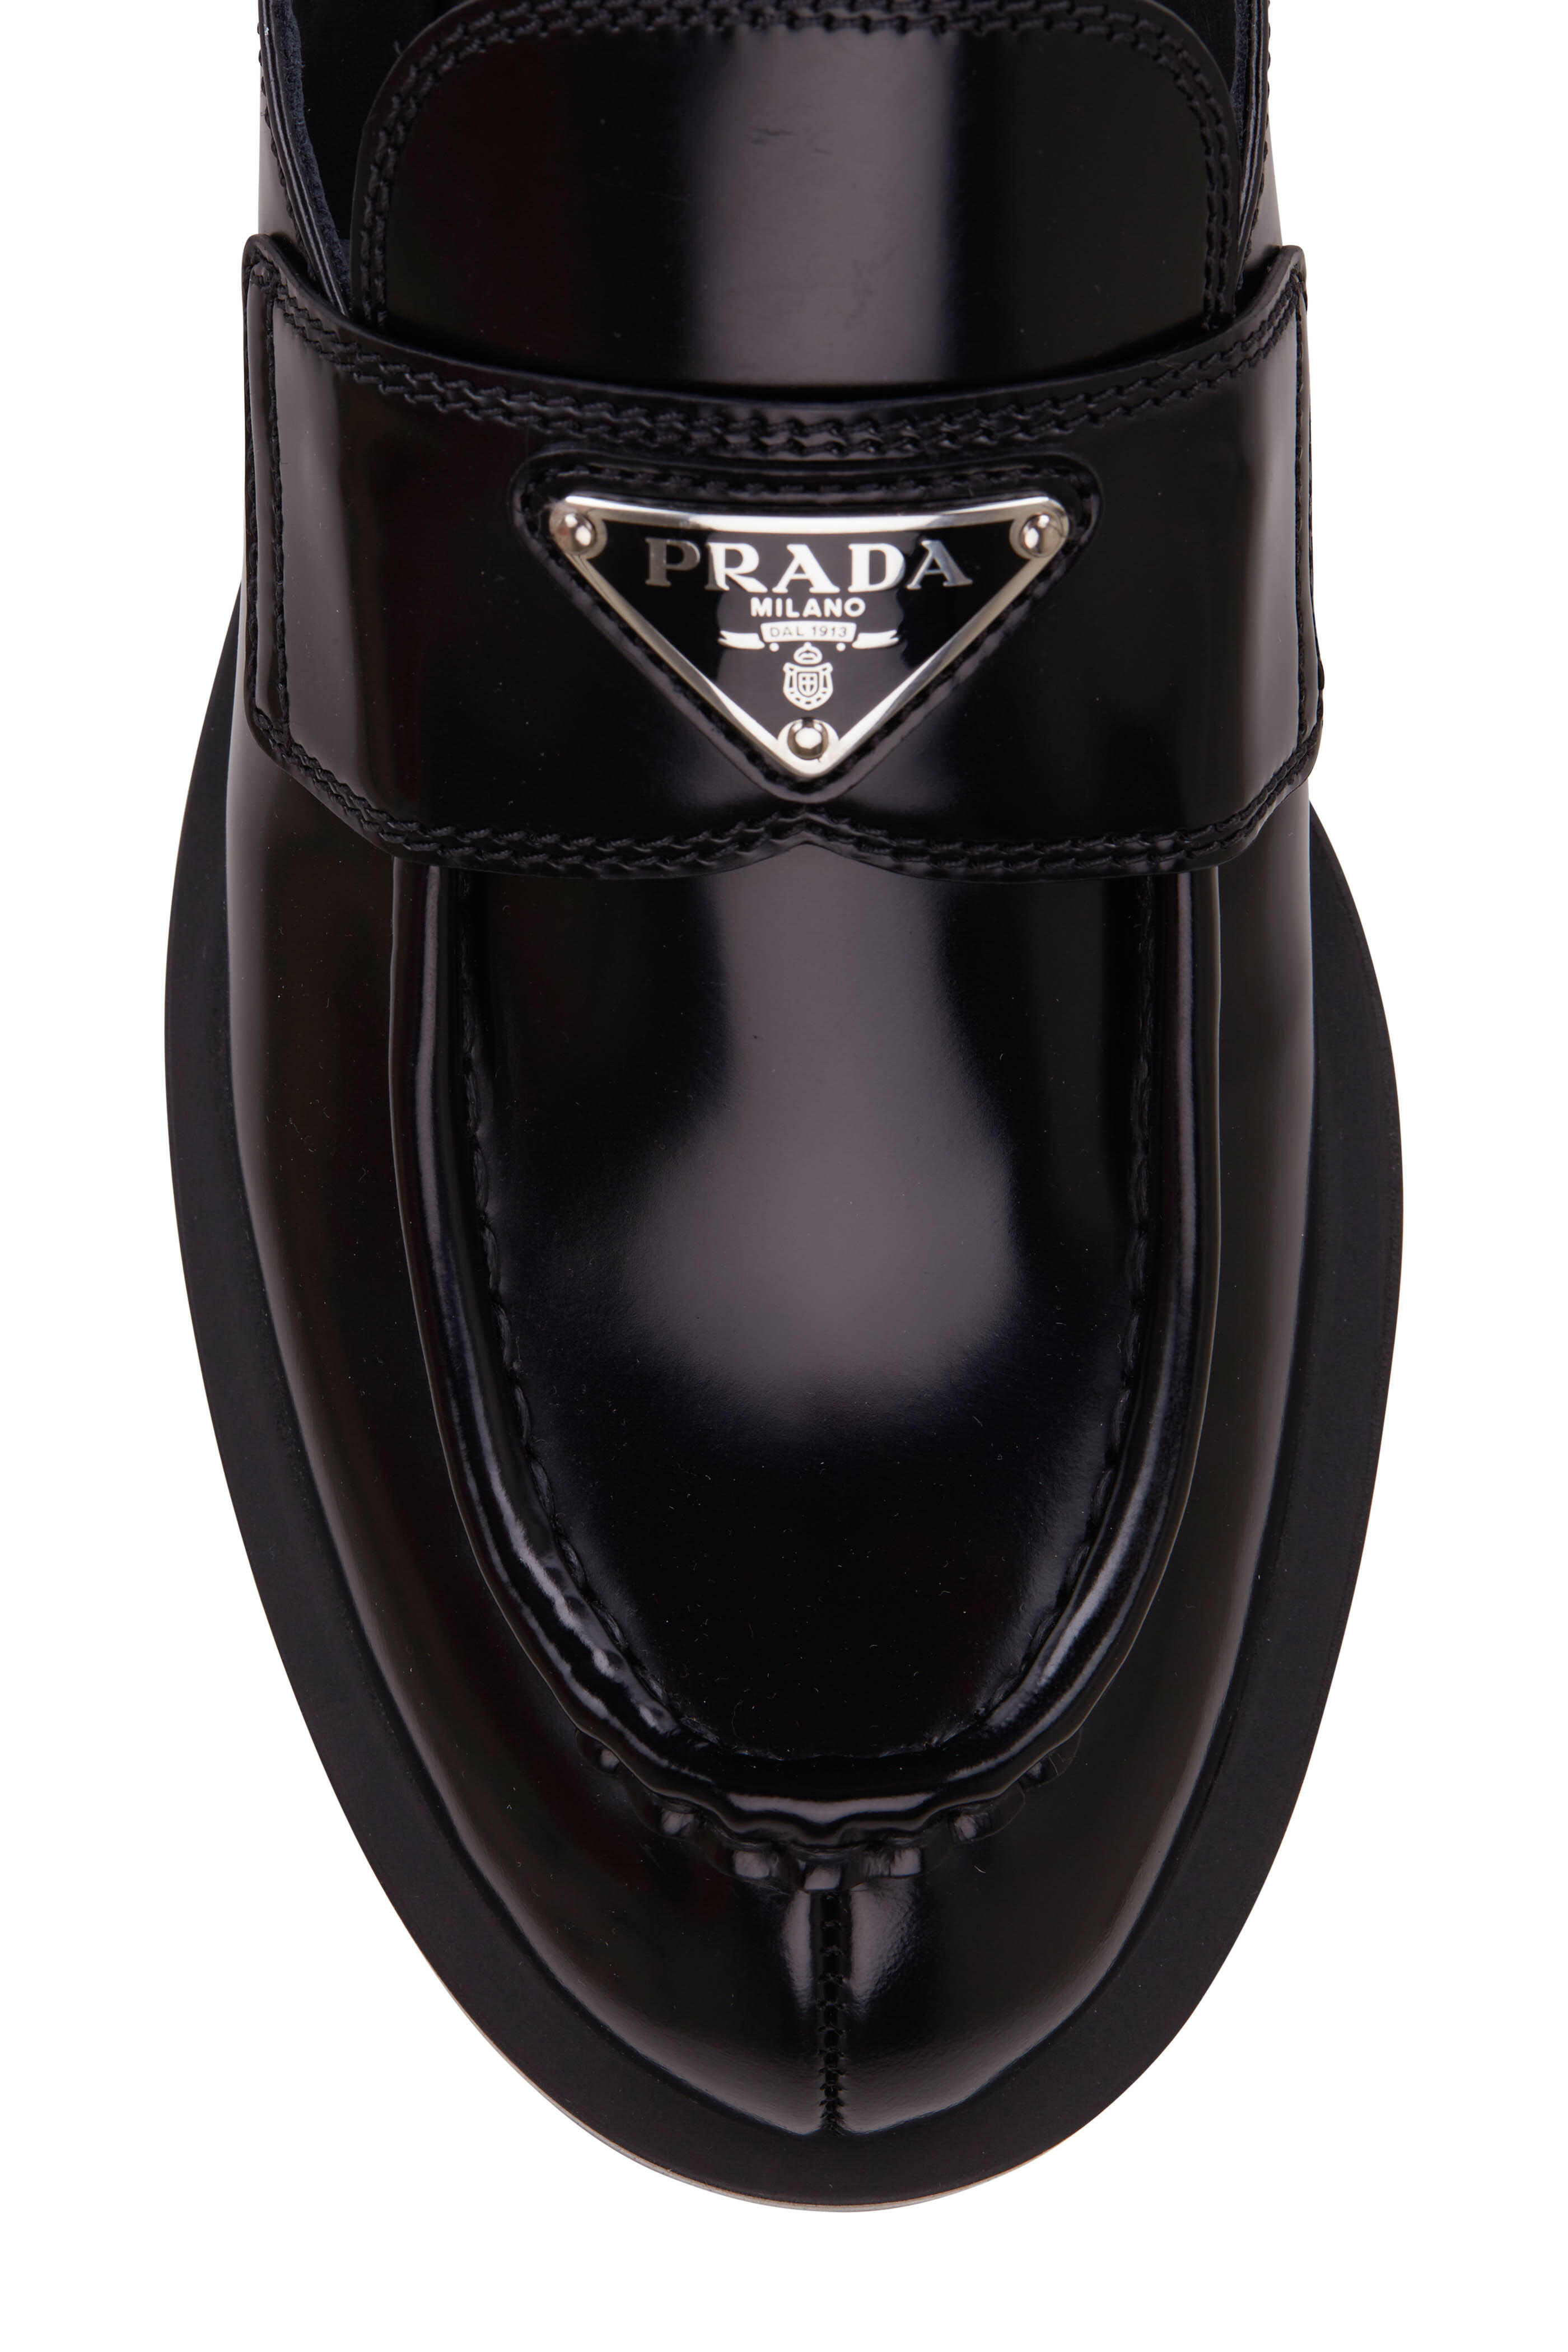 Prada Women's Black Spazzolato Leather Slip on Loafer, 50mm | 9.5 M by Mitchell Stores